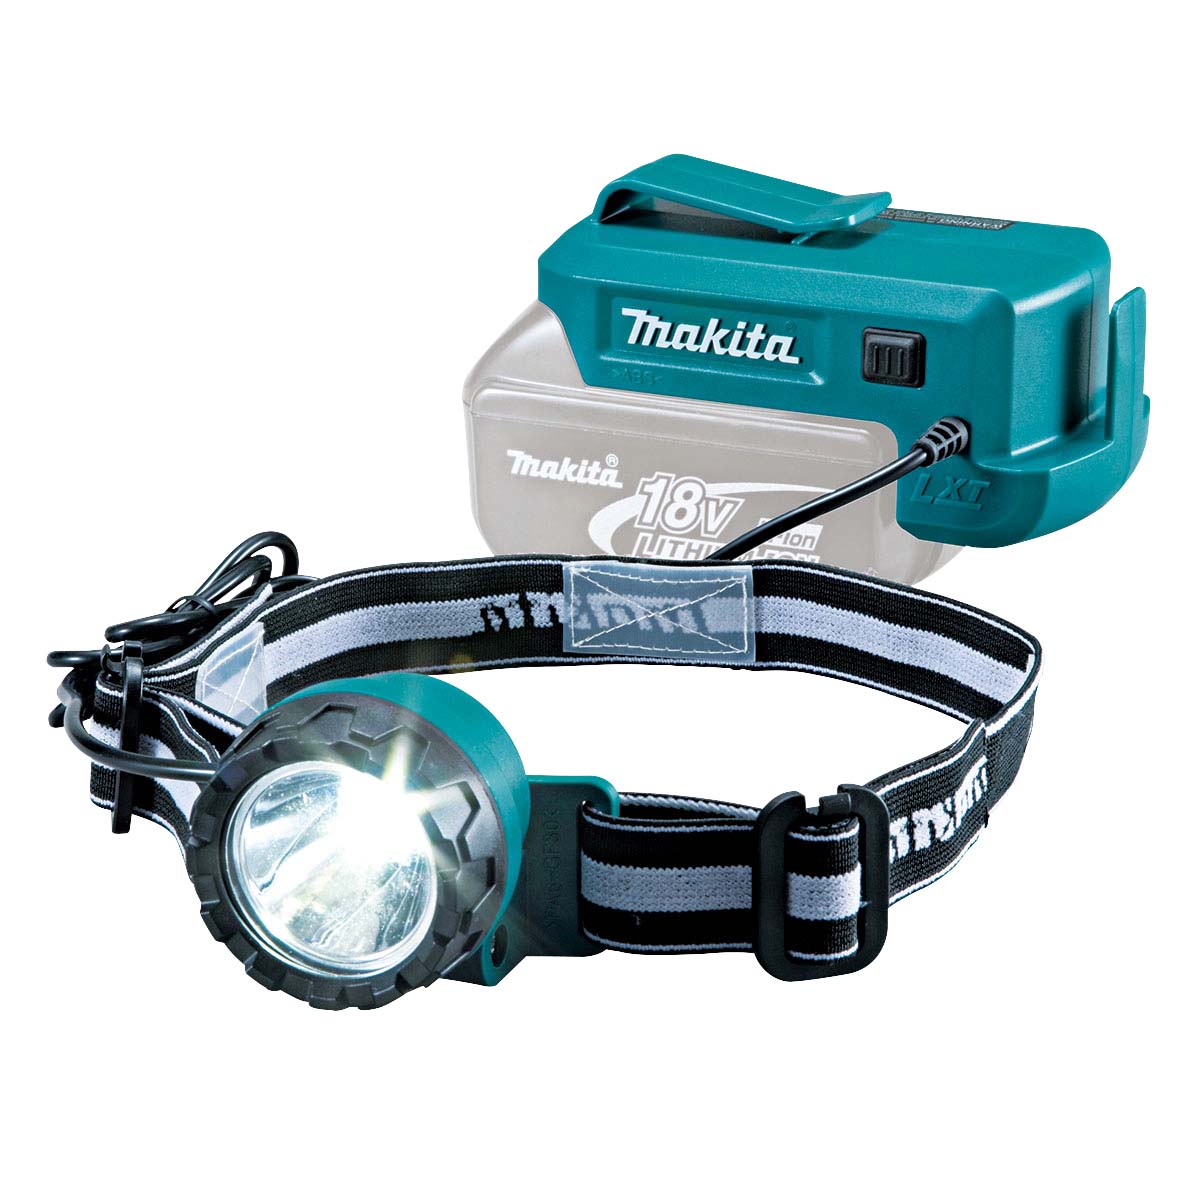 14.4V & 18V Rechargeable Flashlight Bare (Tool Only) DML800 by Makita